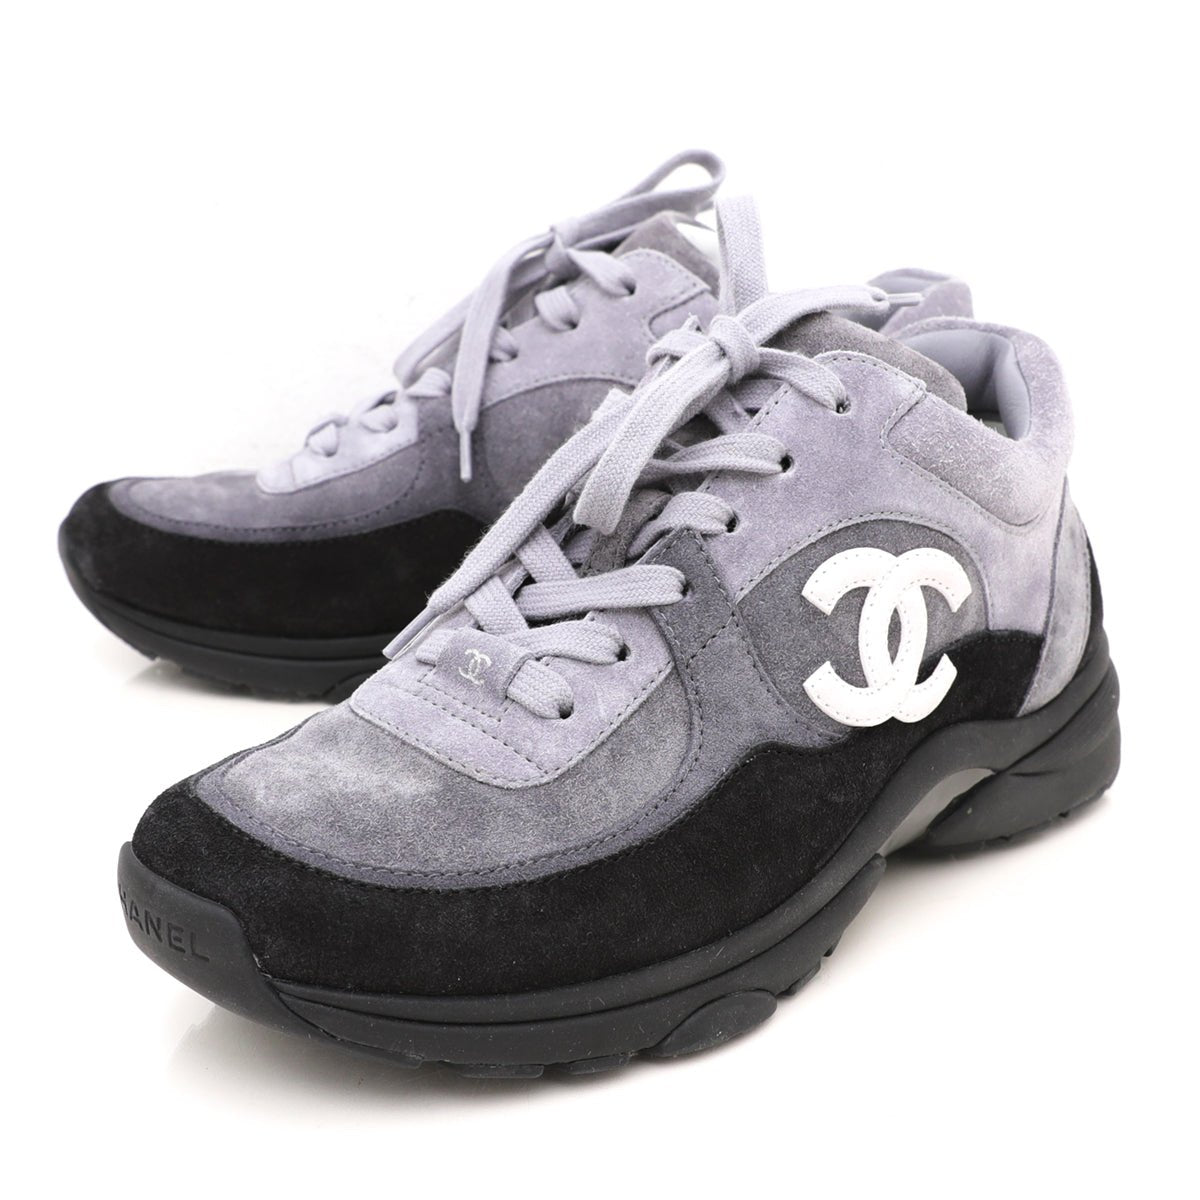 The Closet - Chanel Bicolor CC Suede Low Top Trainer Sneakers 39 | The Closet